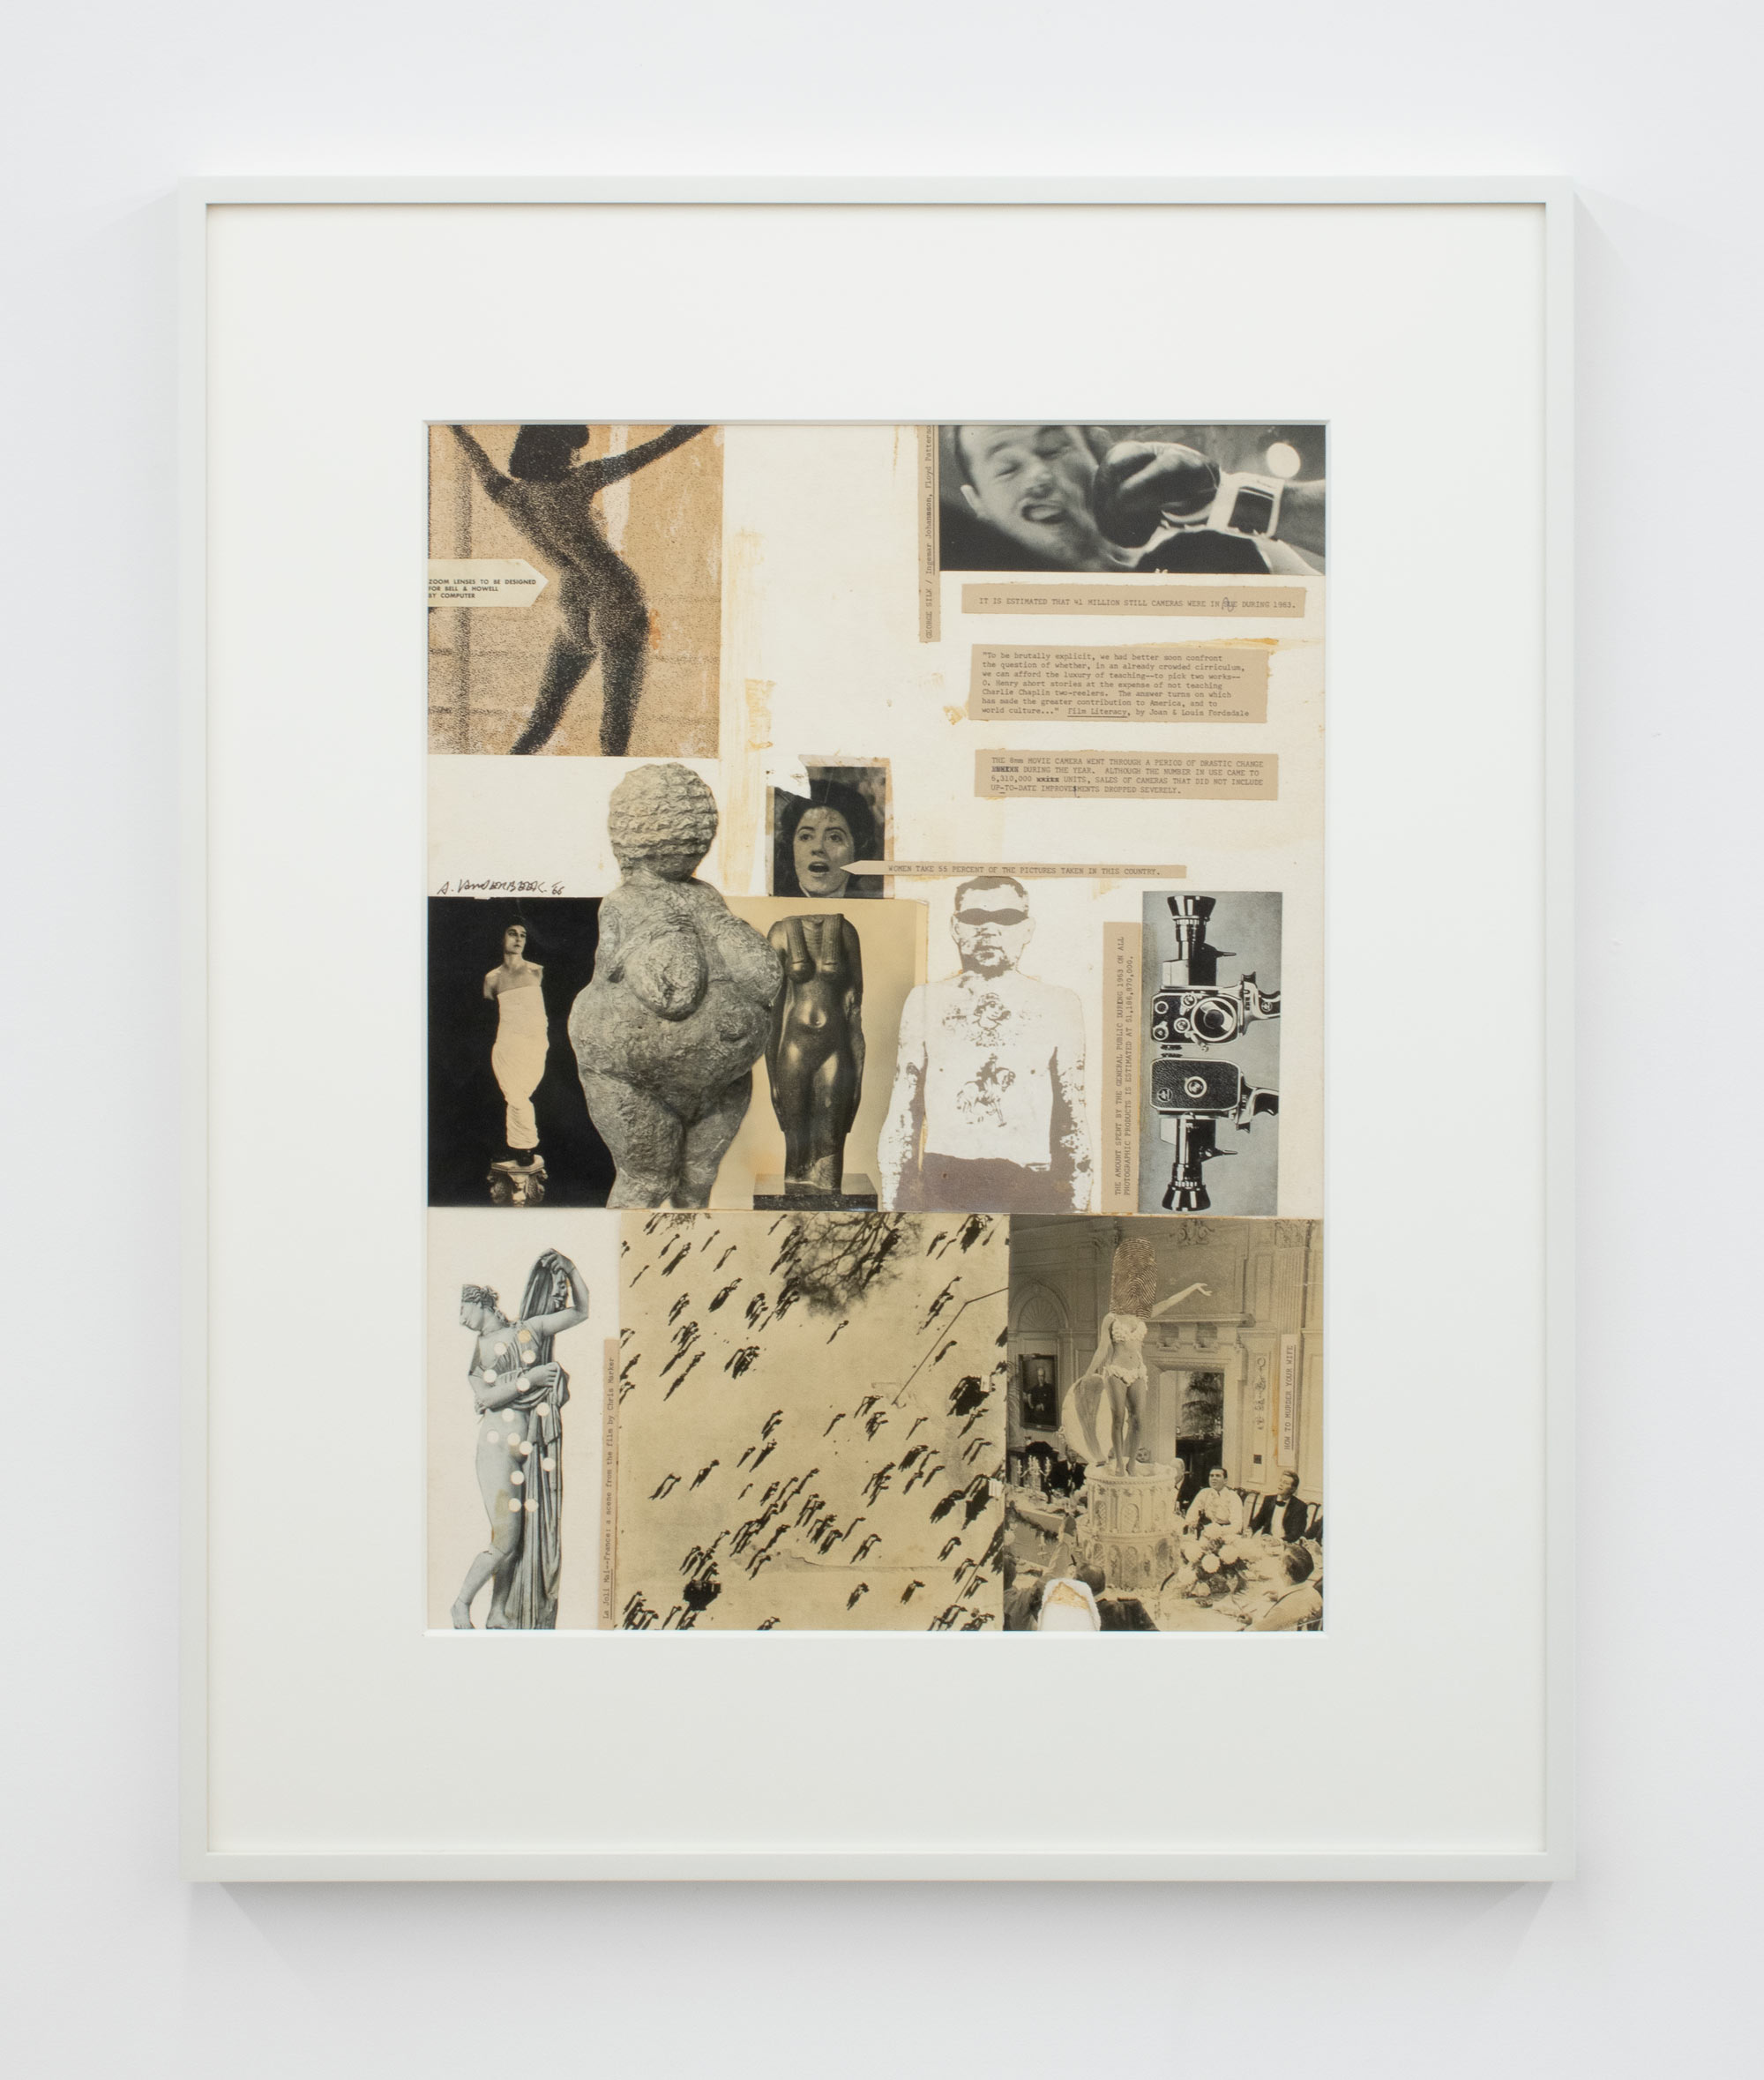 Stan VanDerBeek, Untitled (Culture Intercom), 1966, Photo, Text, and Pen Collage on Board, 31 x 25 3/4 in.